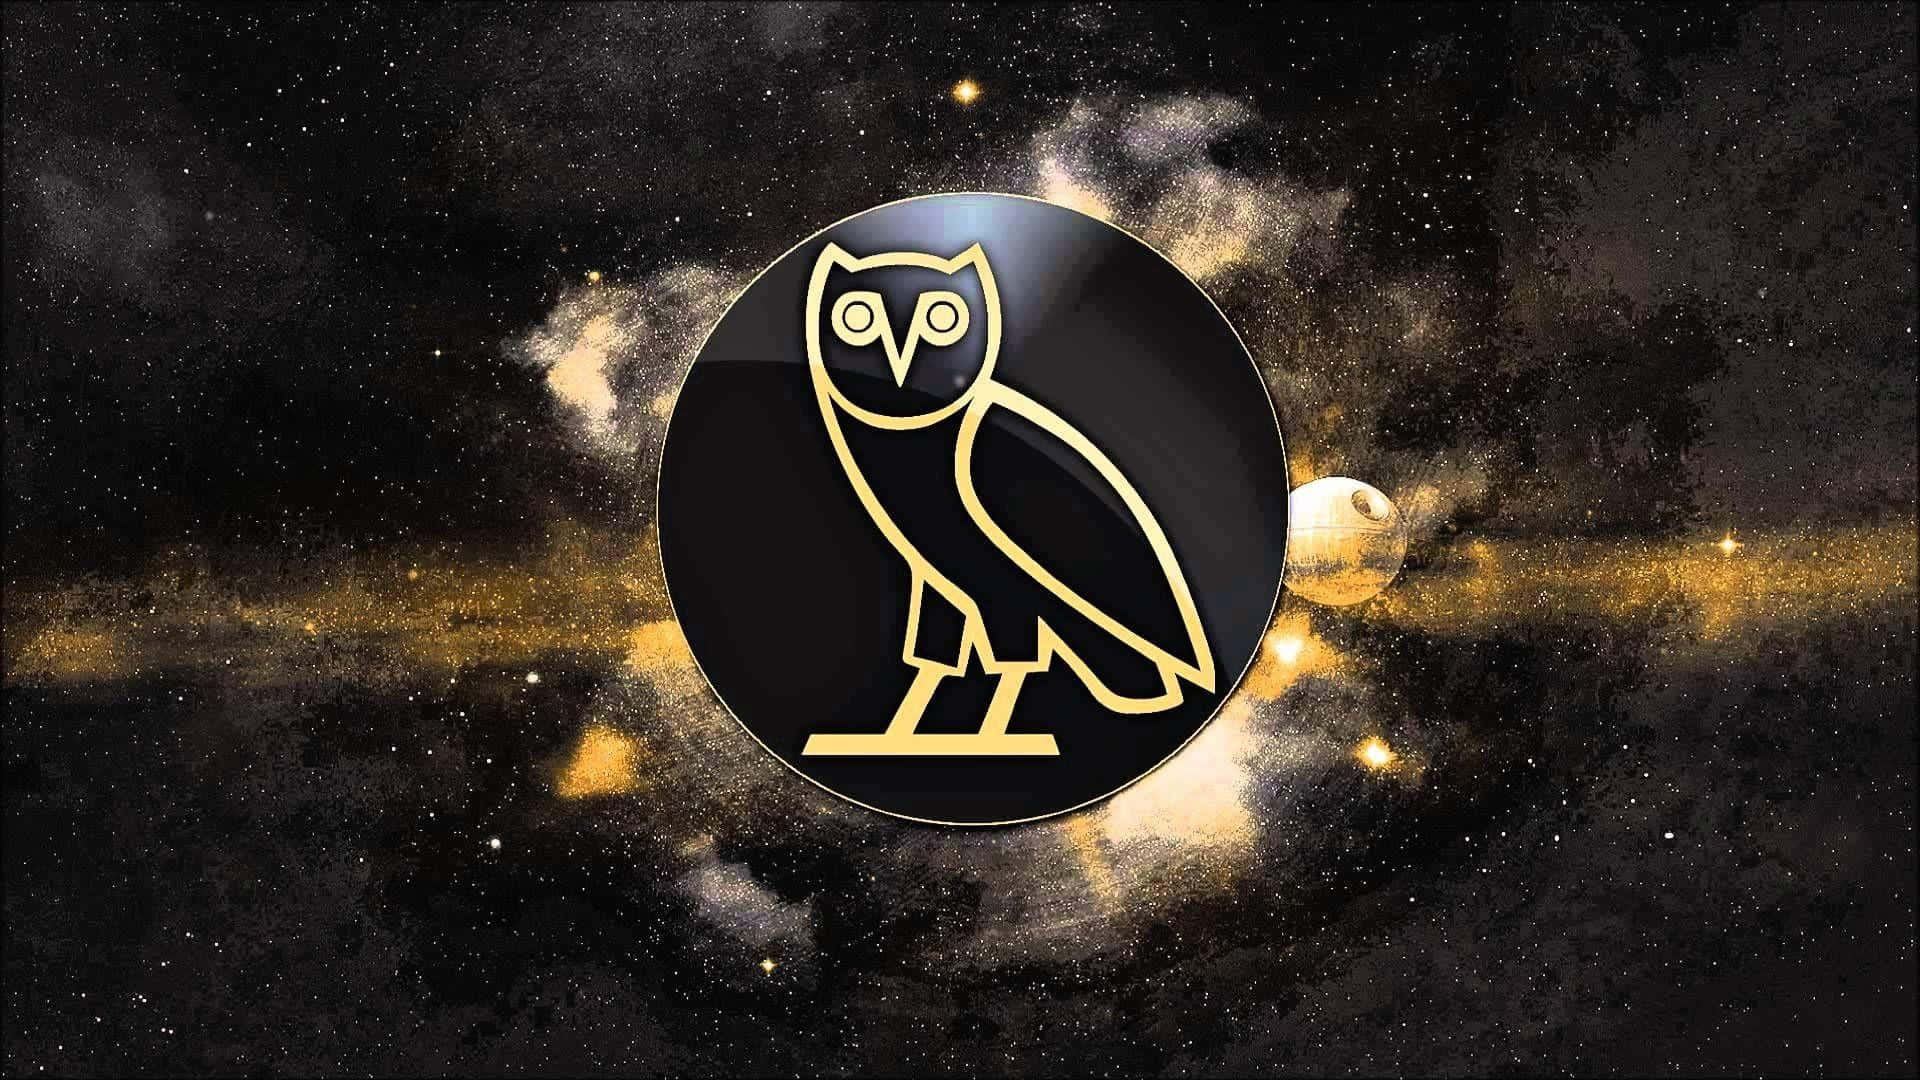 Drake Ovo Owl for iPhone Wallpaper